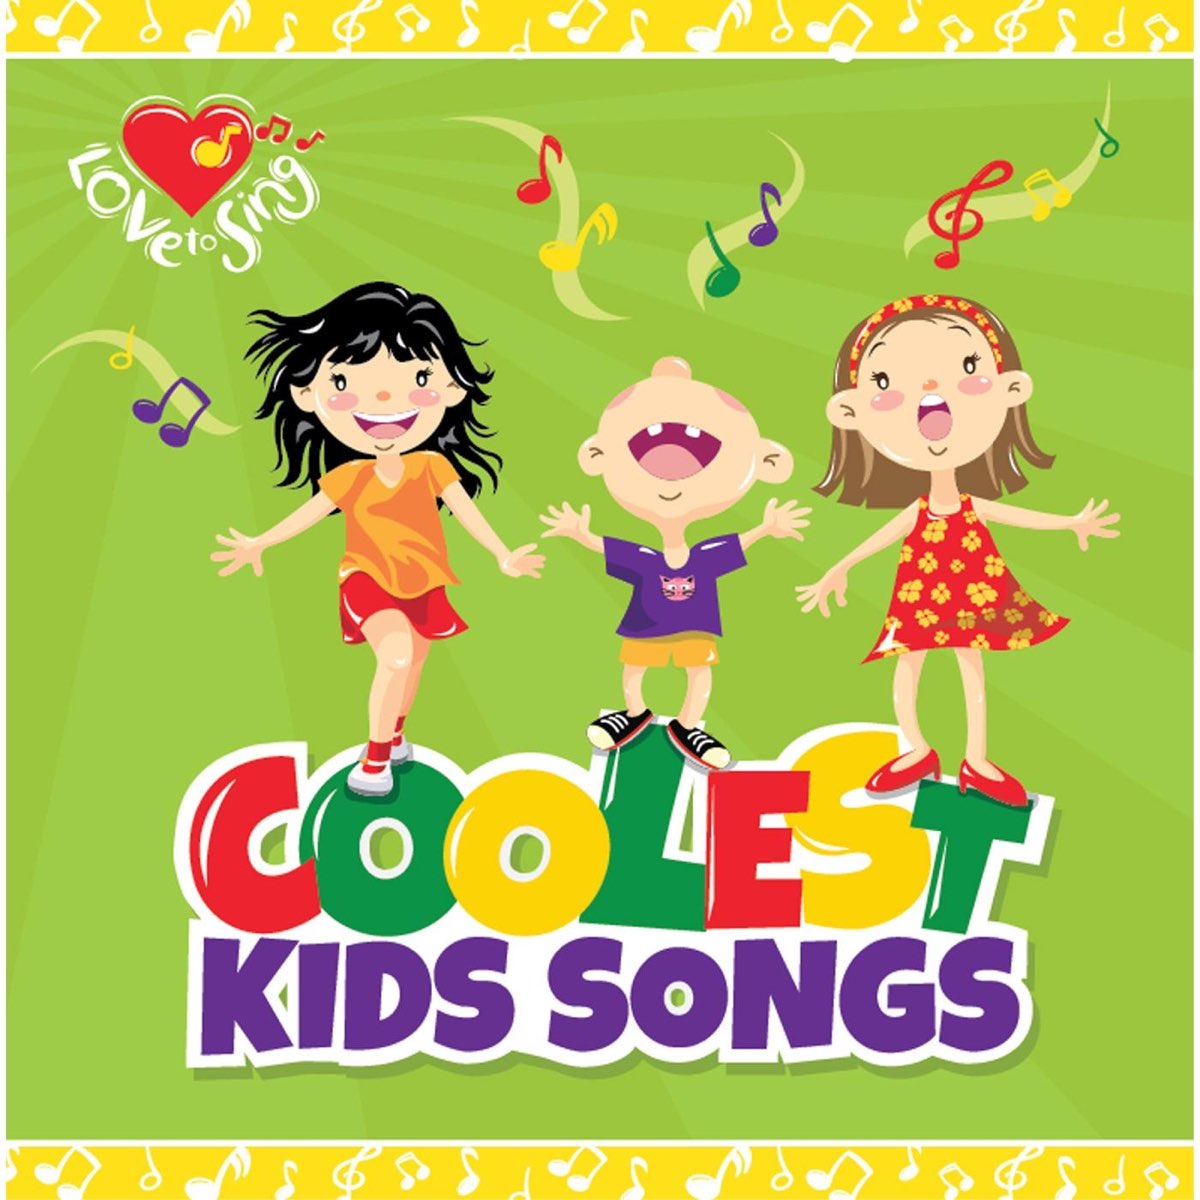 Coolest Kids Songs by Love to Sing on Apple Music